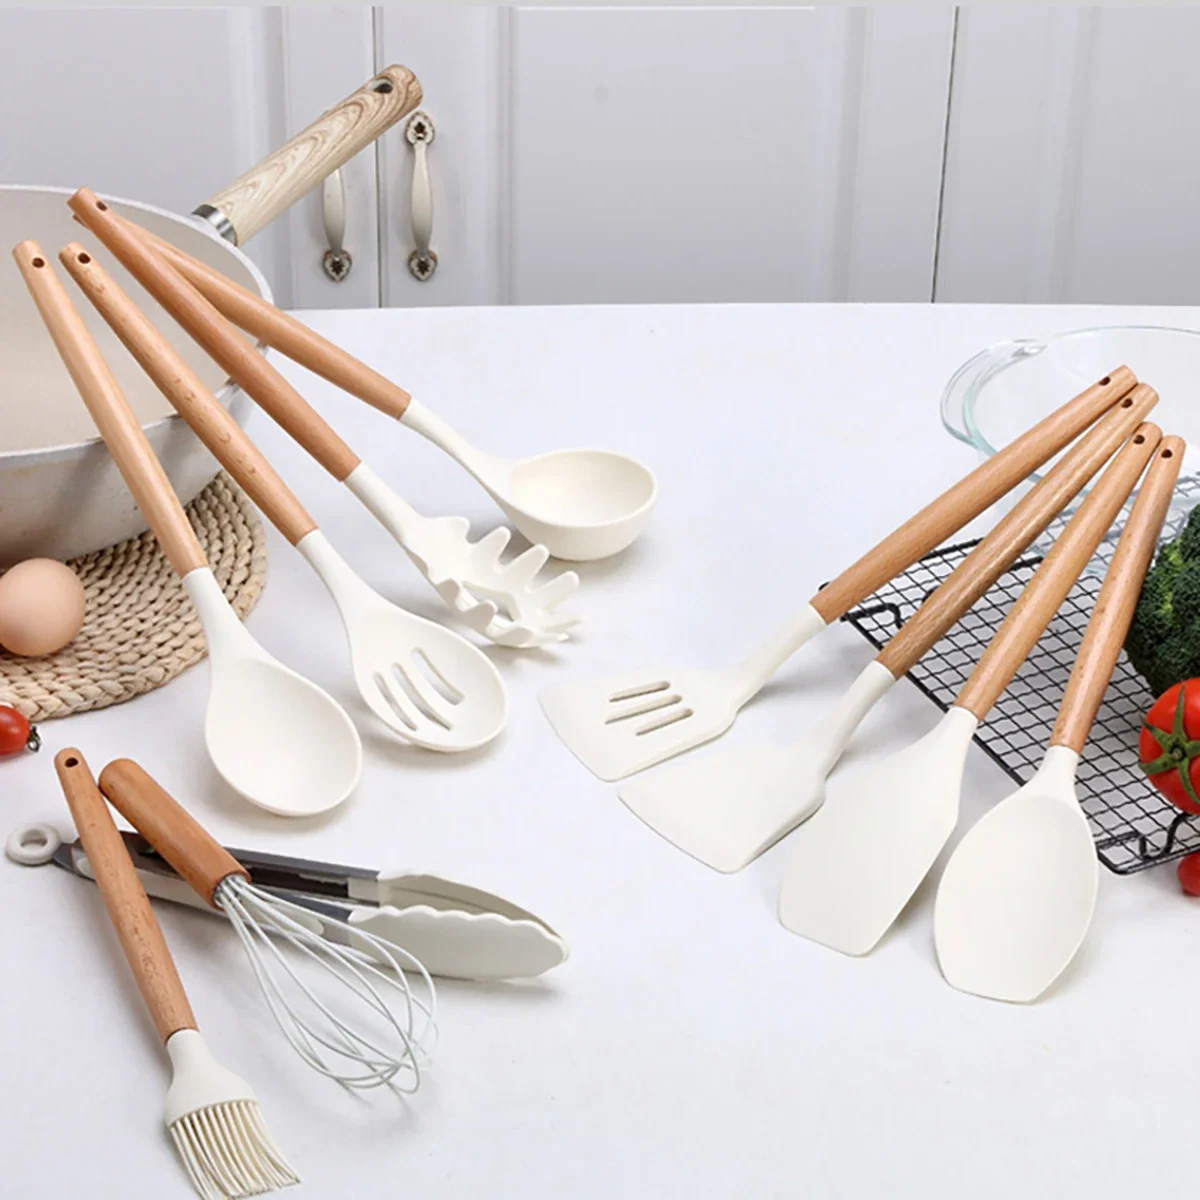 12pcs Silicone Kitchen Utensils Set Non-Stick with Wooden Handles -  Includes Shovel Cooking Utensils Kitchen Special Accessories - AliExpress